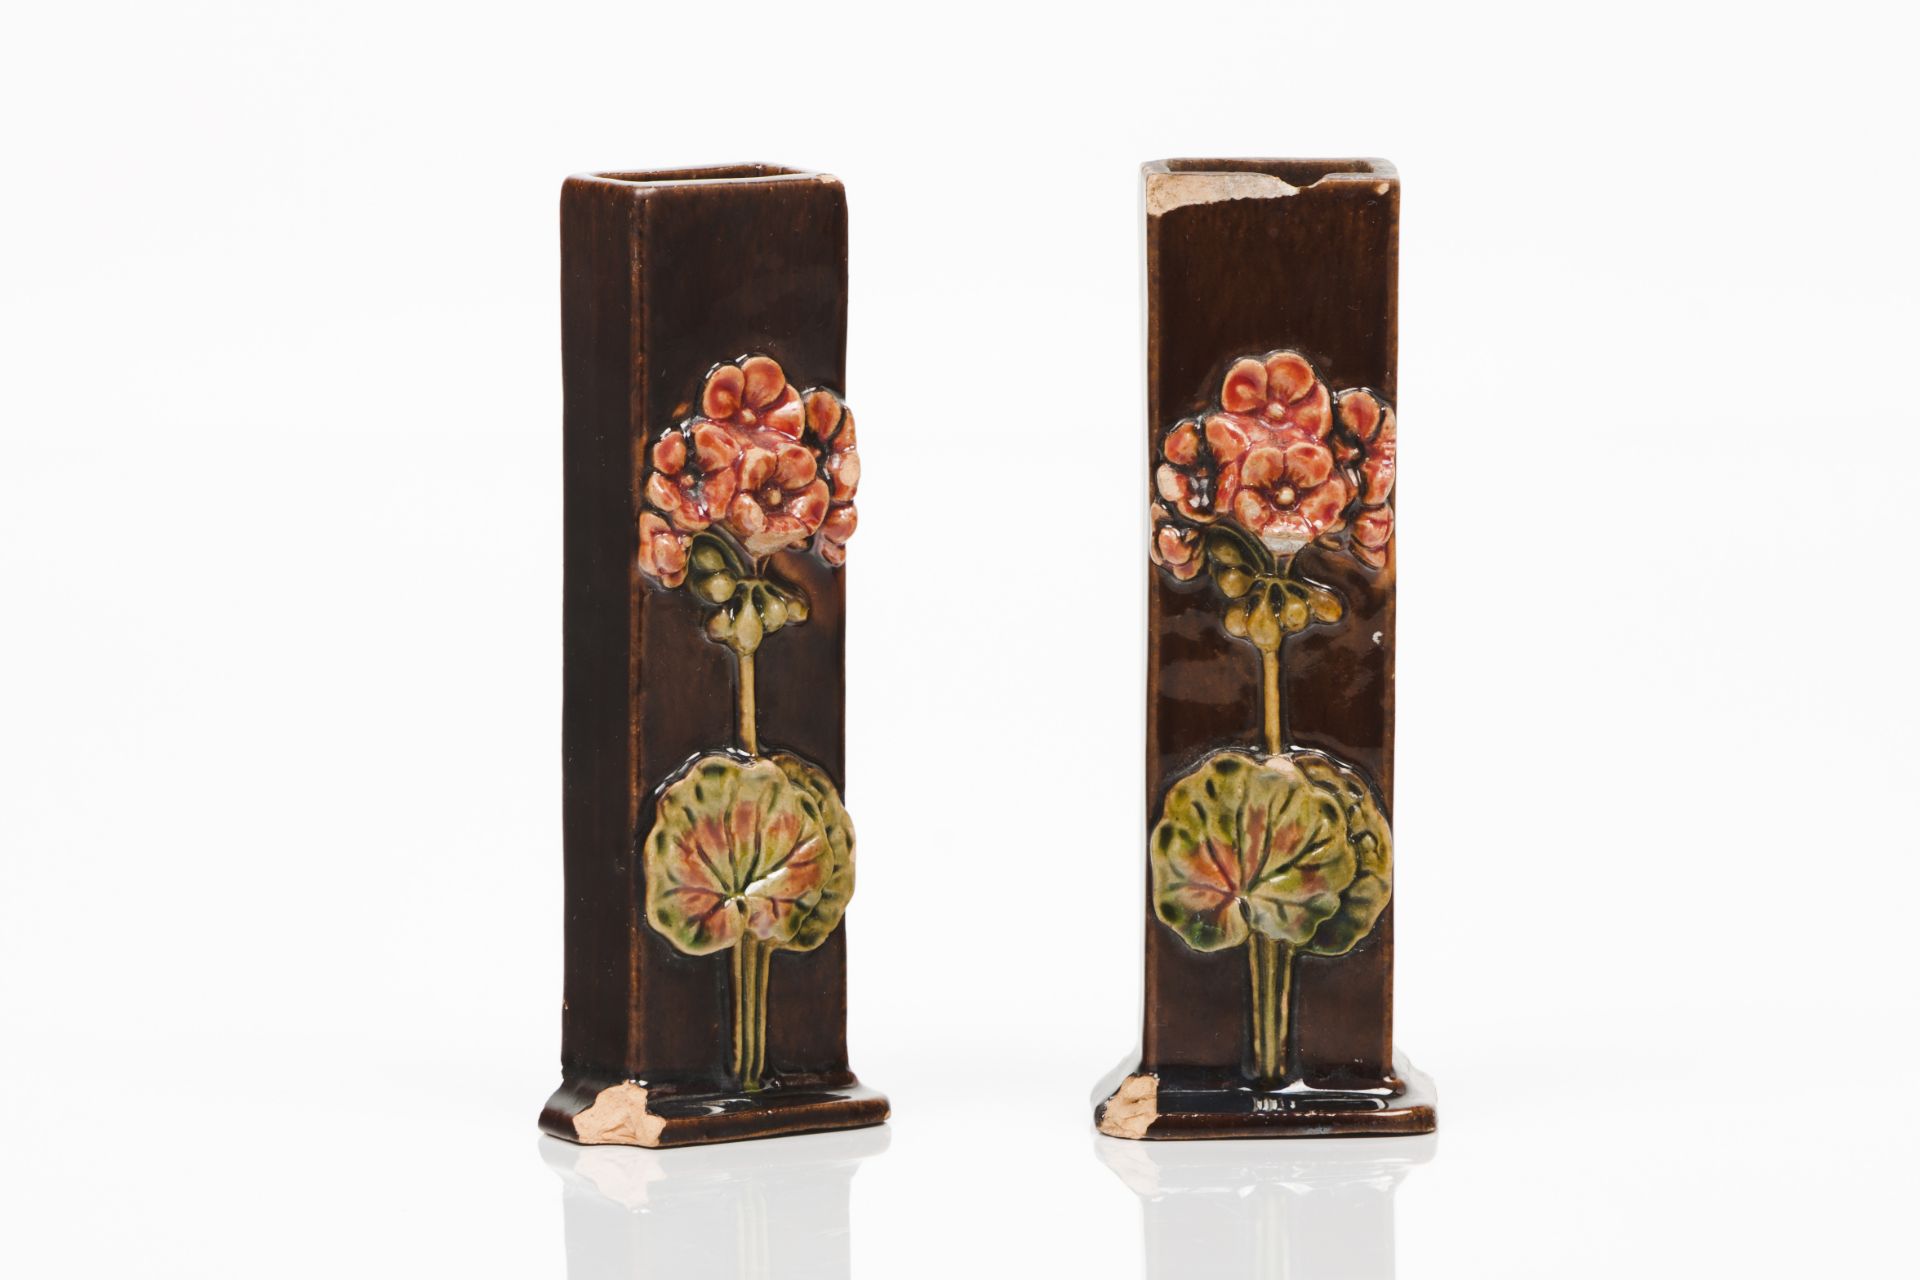 Pair of solitaire vases